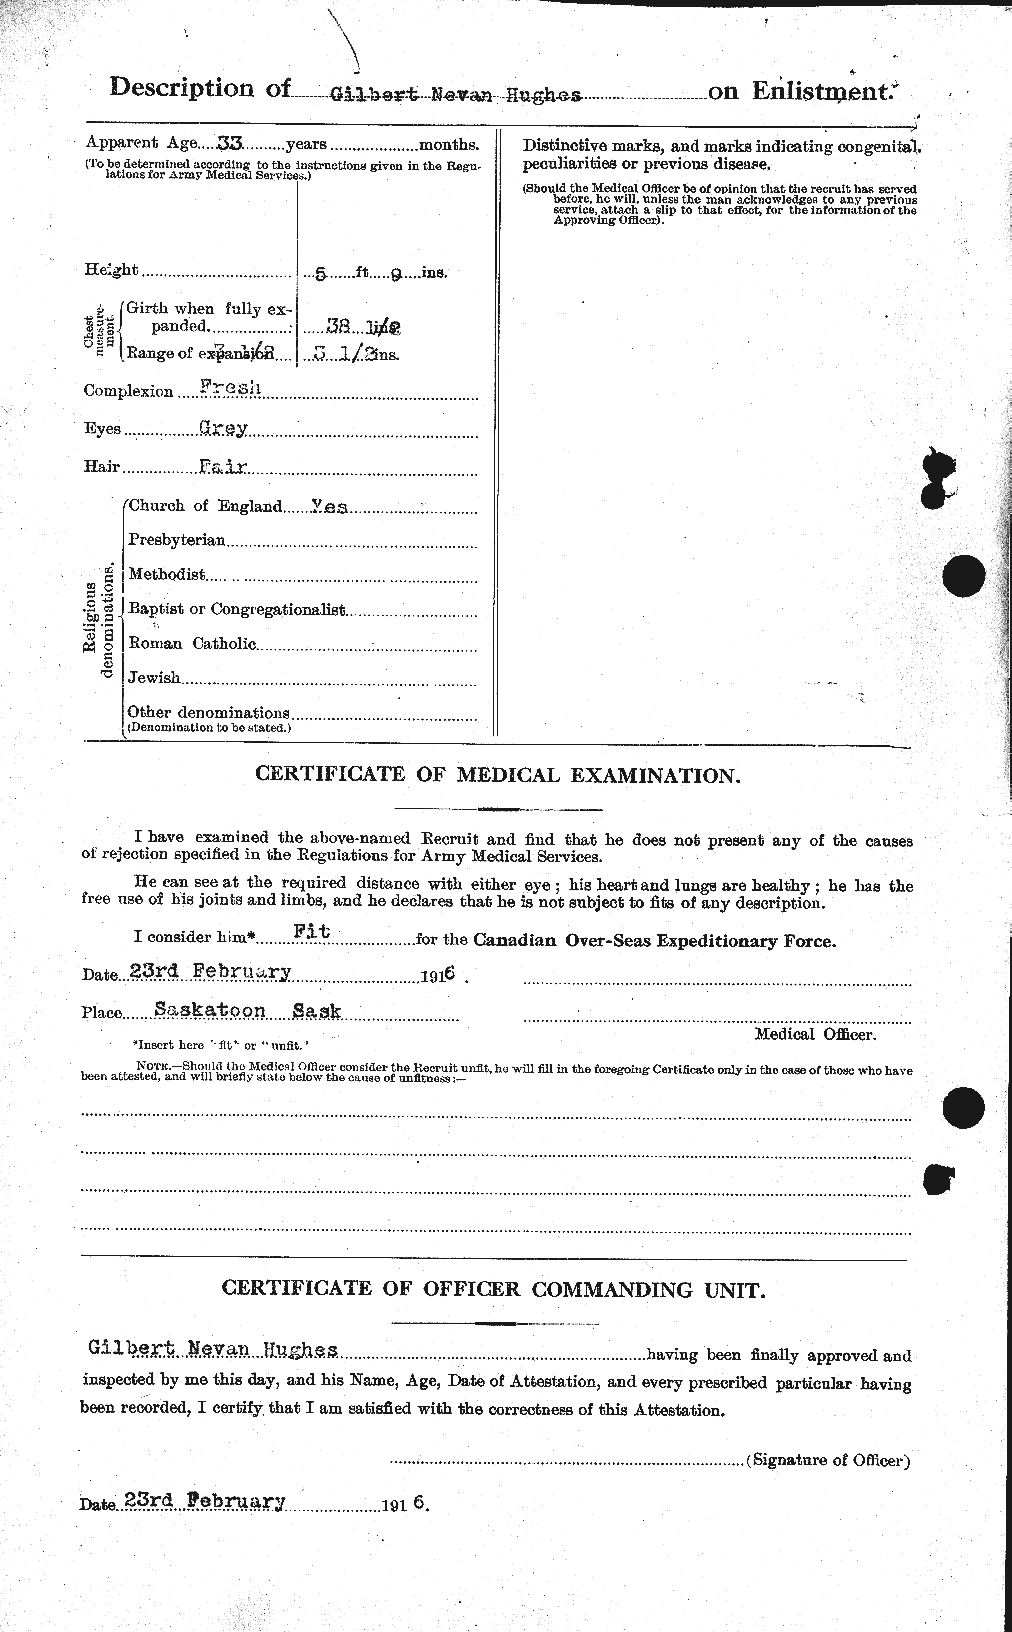 Personnel Records of the First World War - CEF 403841b